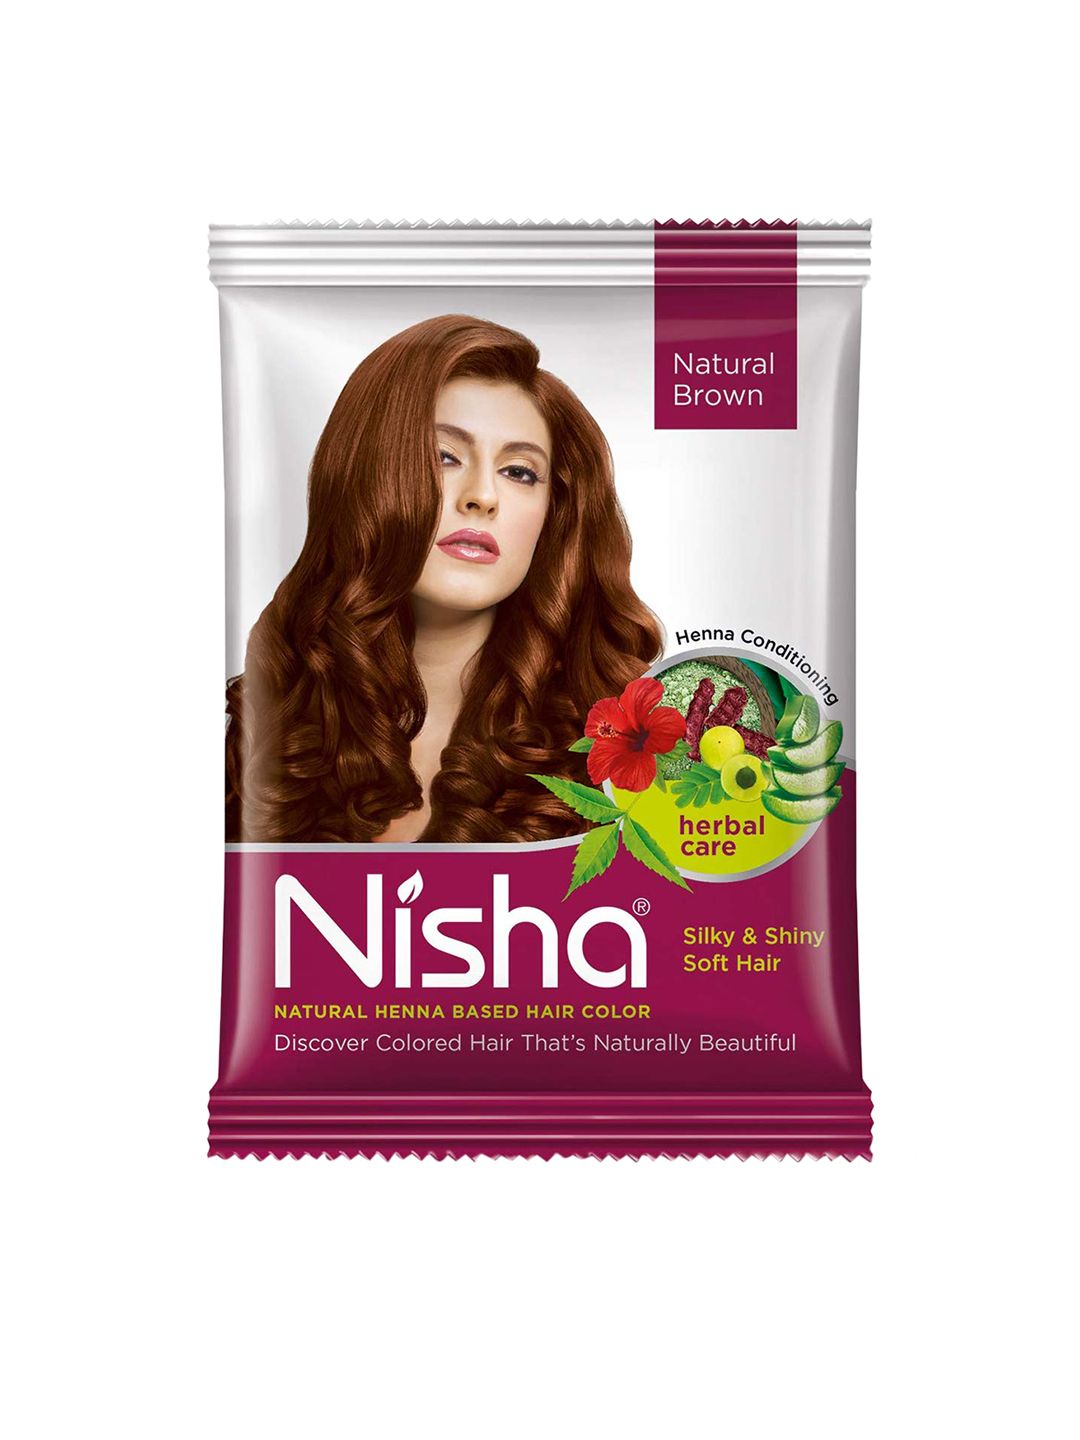 Nisha Set of 12 Henna Based Hair Colour 360g - Natural Brown Price in India